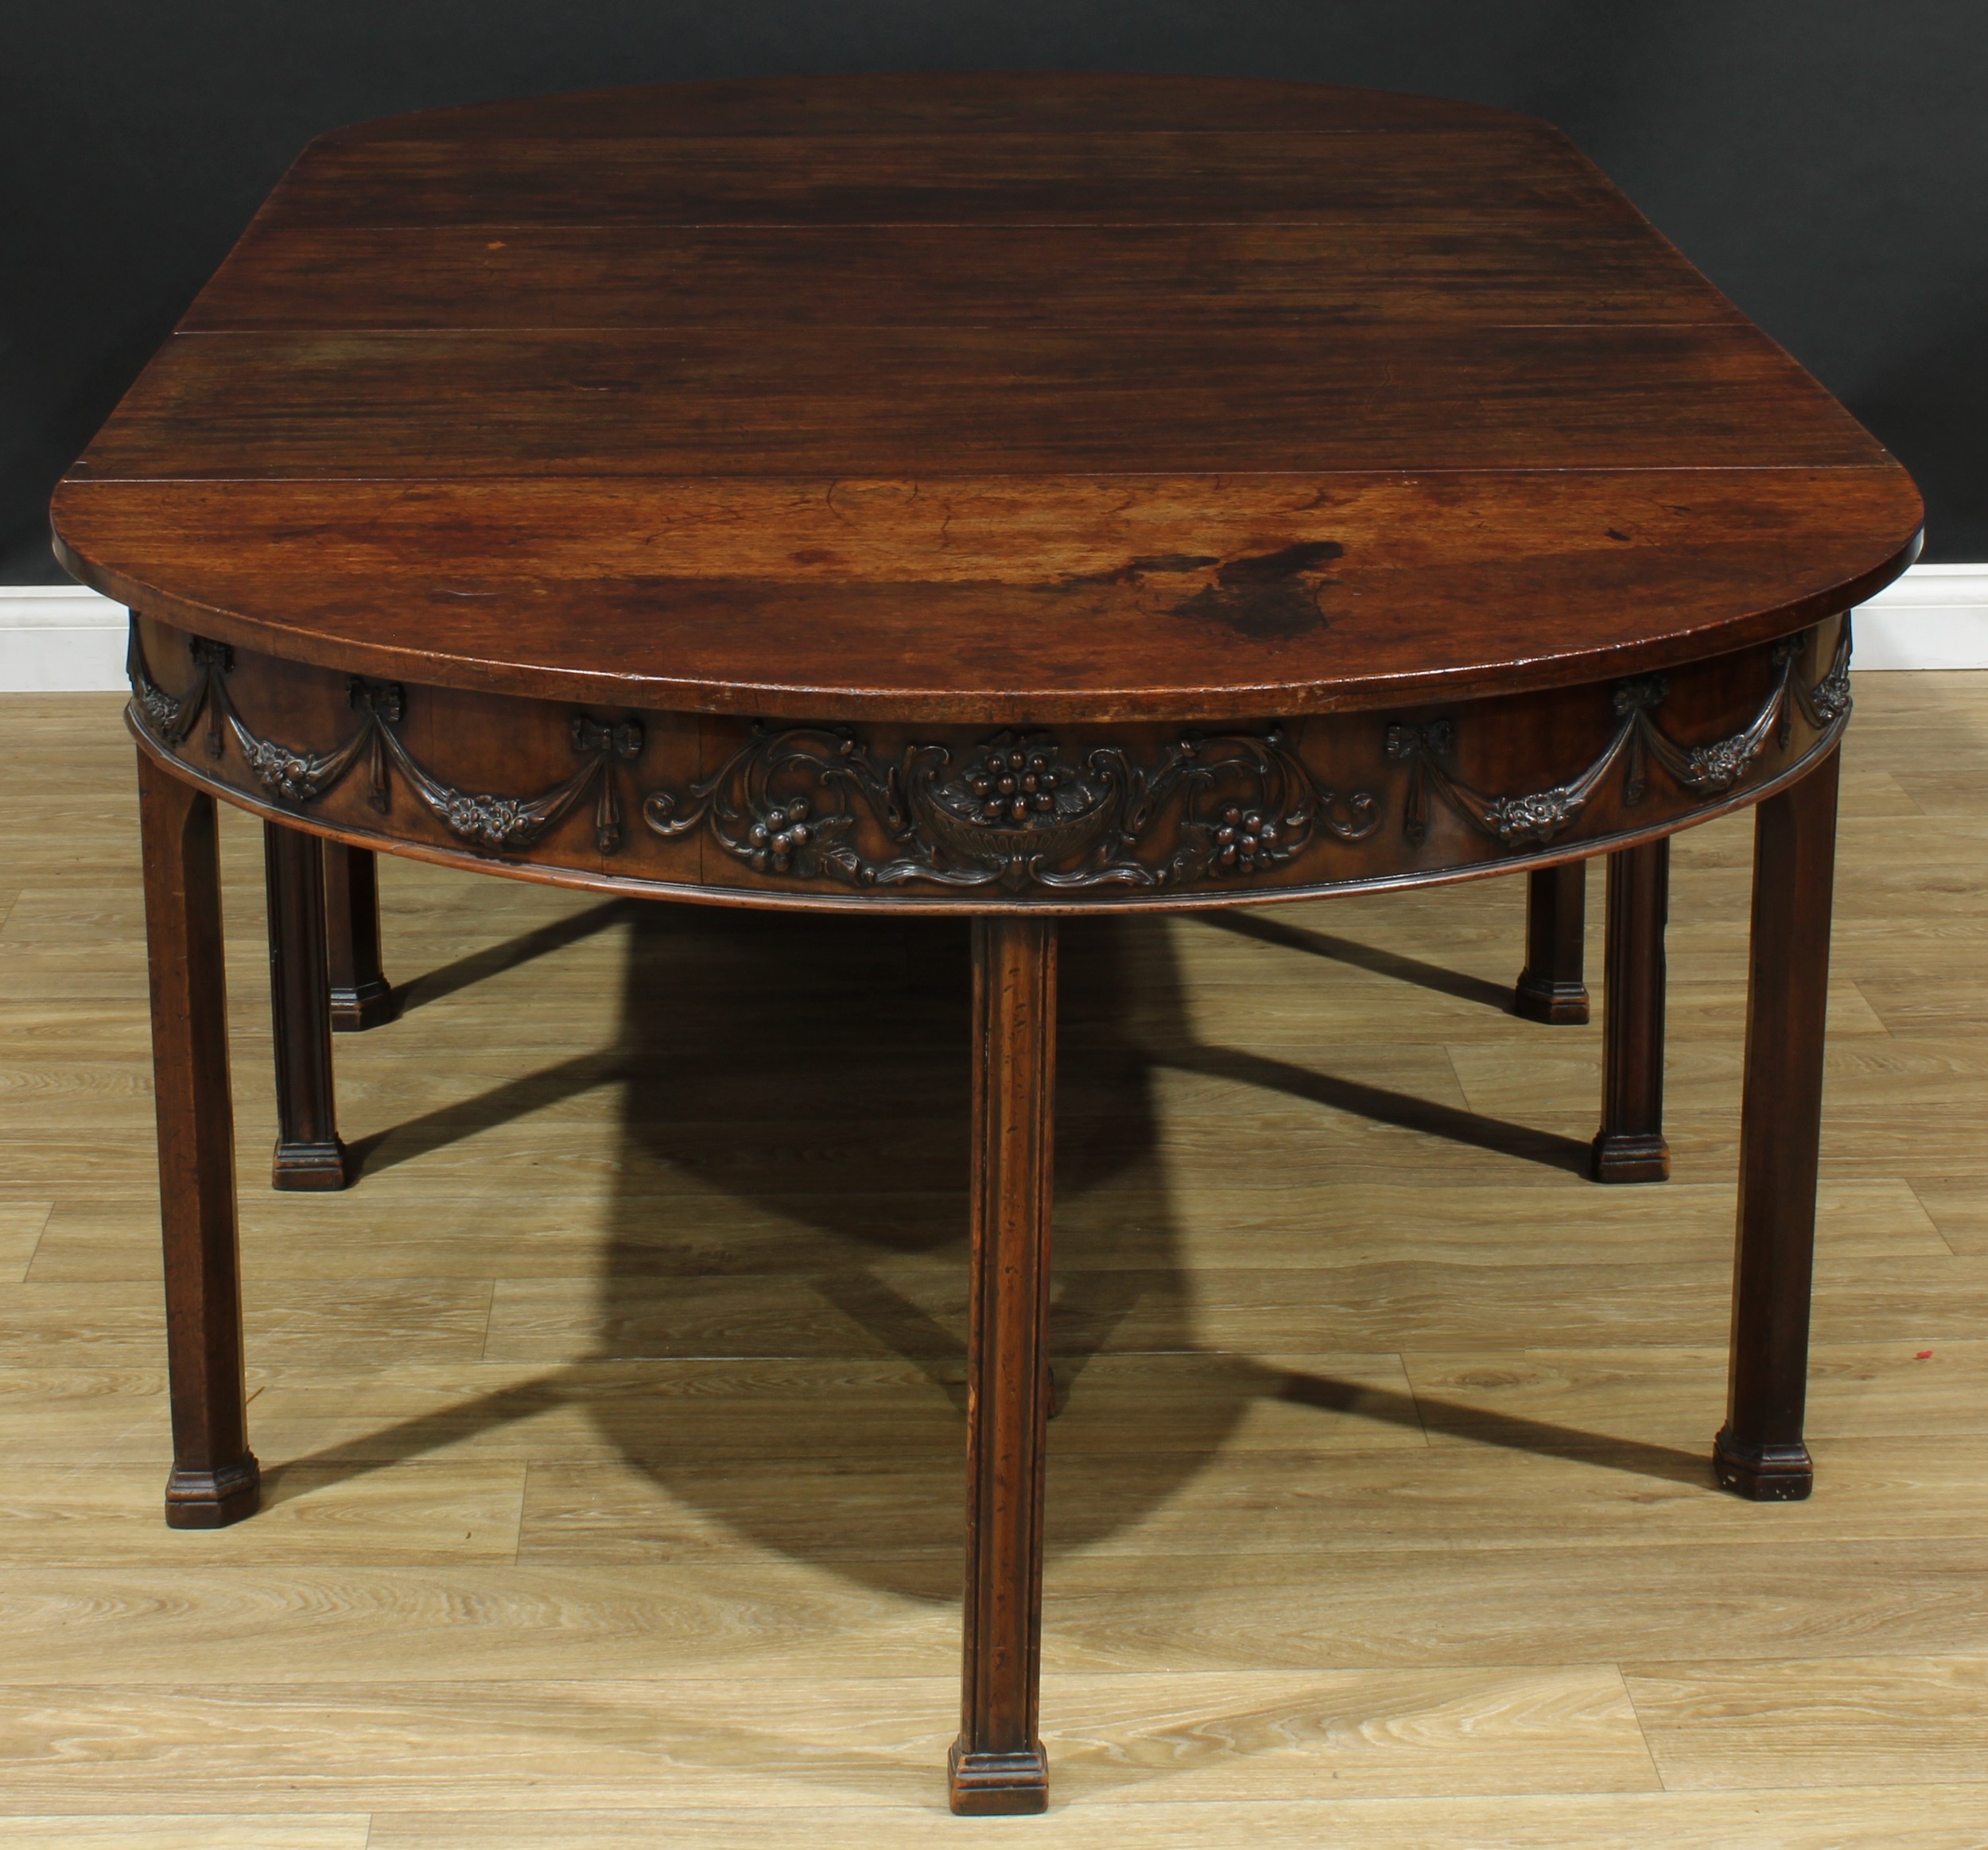 A 19th century Adam Revival mahogany D-end dining table, comprising a pair of demilune end